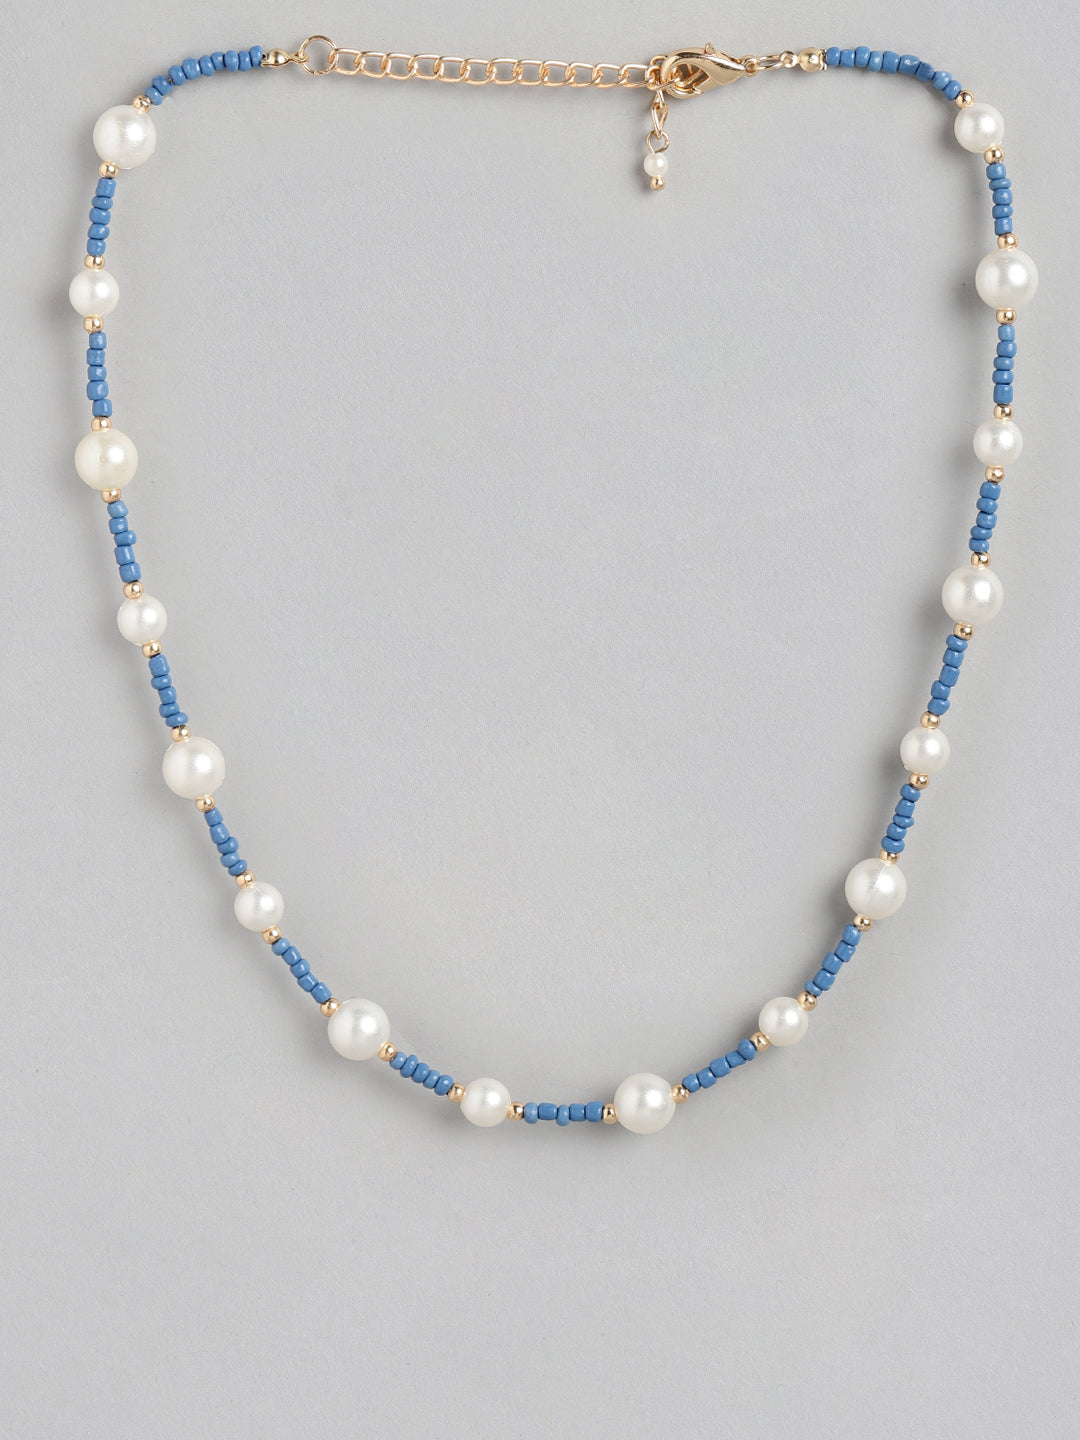 Blueberry Piper pearl necklace